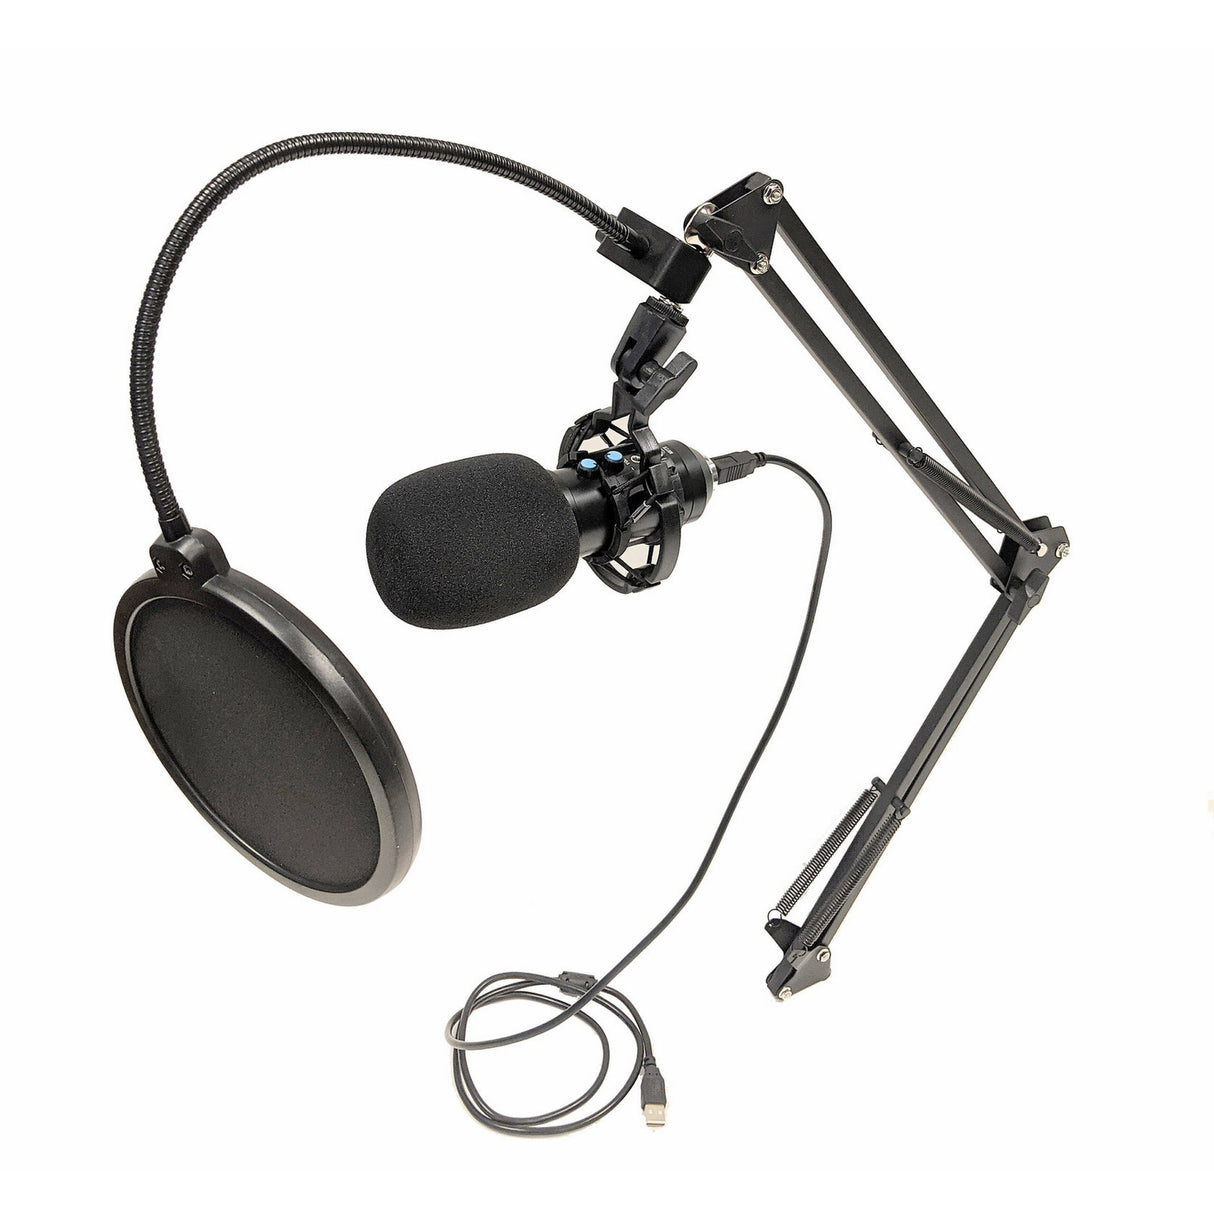 Bescor USB Microphone with Boom Arm Stand, Pop Filter, Foam Windscreen and USB Cable